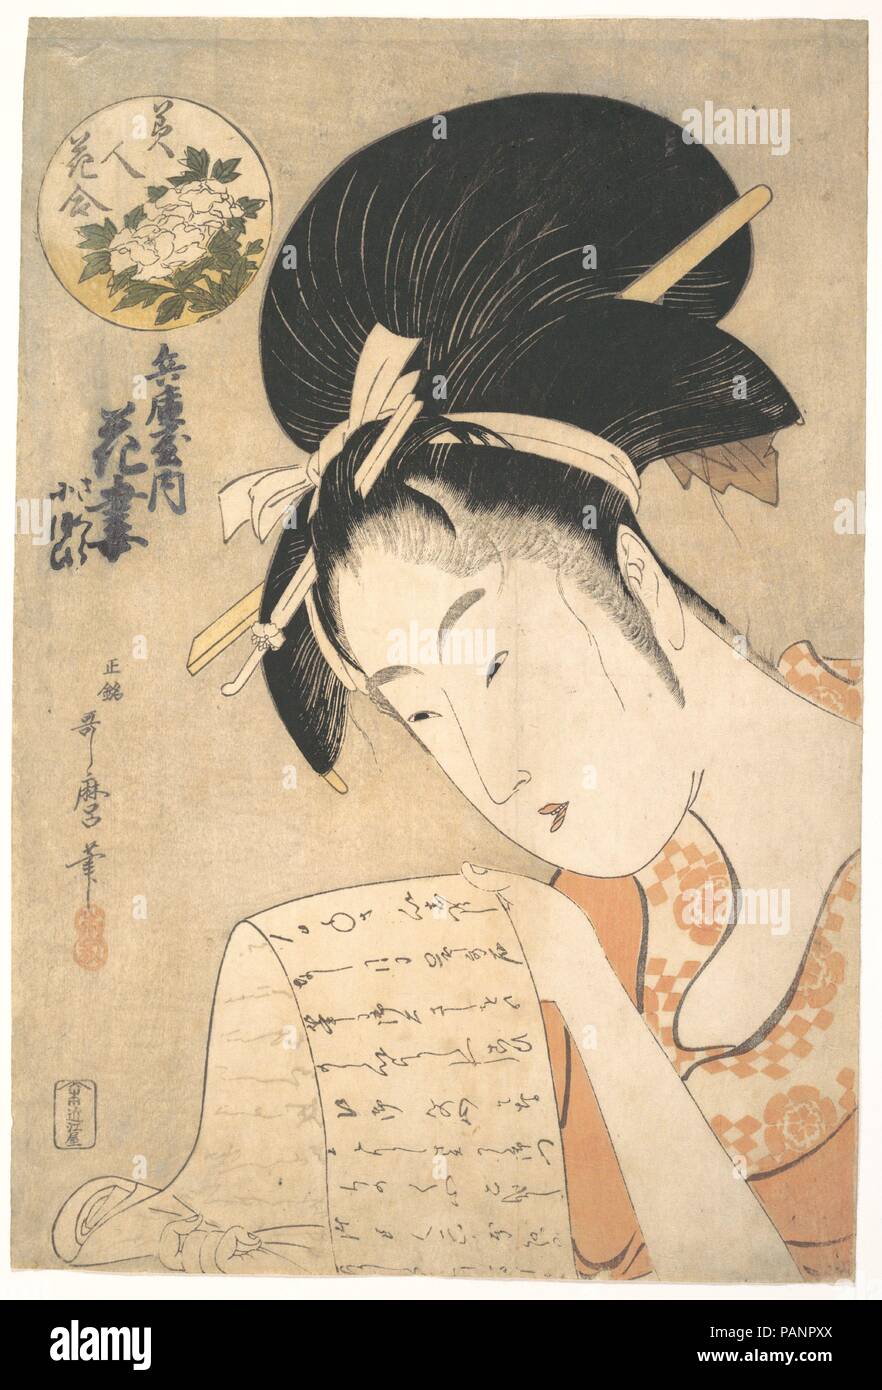 'The Courtesan Hanazuma Reading a Letter,' from the series Beauties Compared to Flowers (Bijin hana awase). Artist: Kitagawa Utamaro (Japanese, ca. 1754-1806). Culture: Japan. Dimensions: H. 15 1/4 in. (38.7 cm); W. 10 1/4 in. (26 cm). Date: 1790s.  The courtesan Hanazuma, of the Hyogoya brothel, uses both hands to hold a letter very close to her eyes. In the upper left corner is a white peony in a circle; the background is in pale powdered mica. Museum: Metropolitan Museum of Art, New York, USA. Stock Photo